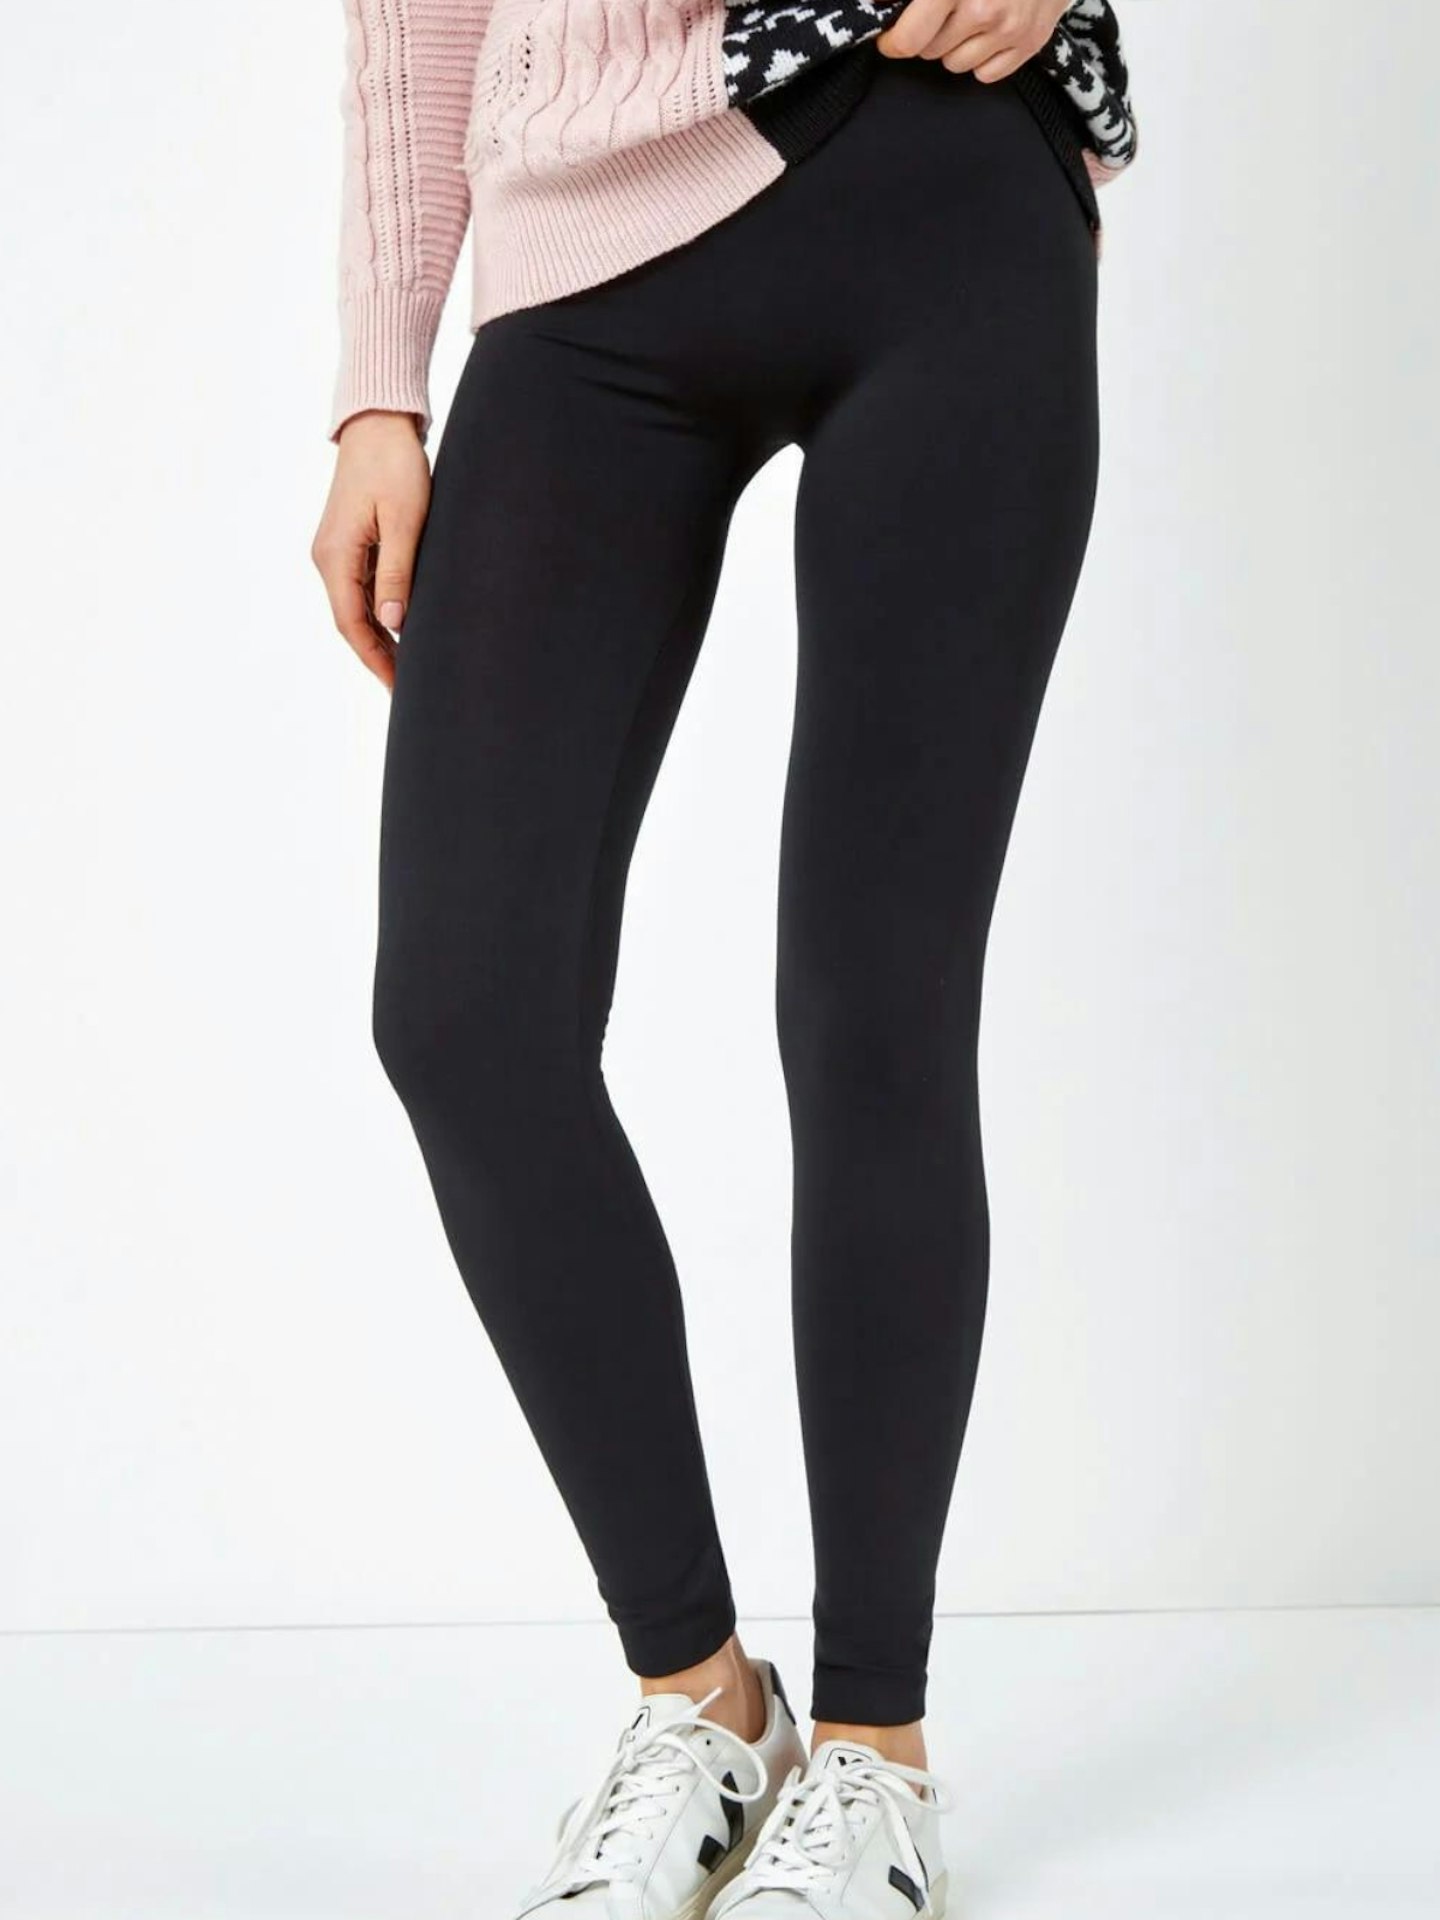 Marks and Spencer Women's Heat Gen Plus Legging, Charcoal, 8 at   Women's Clothing store